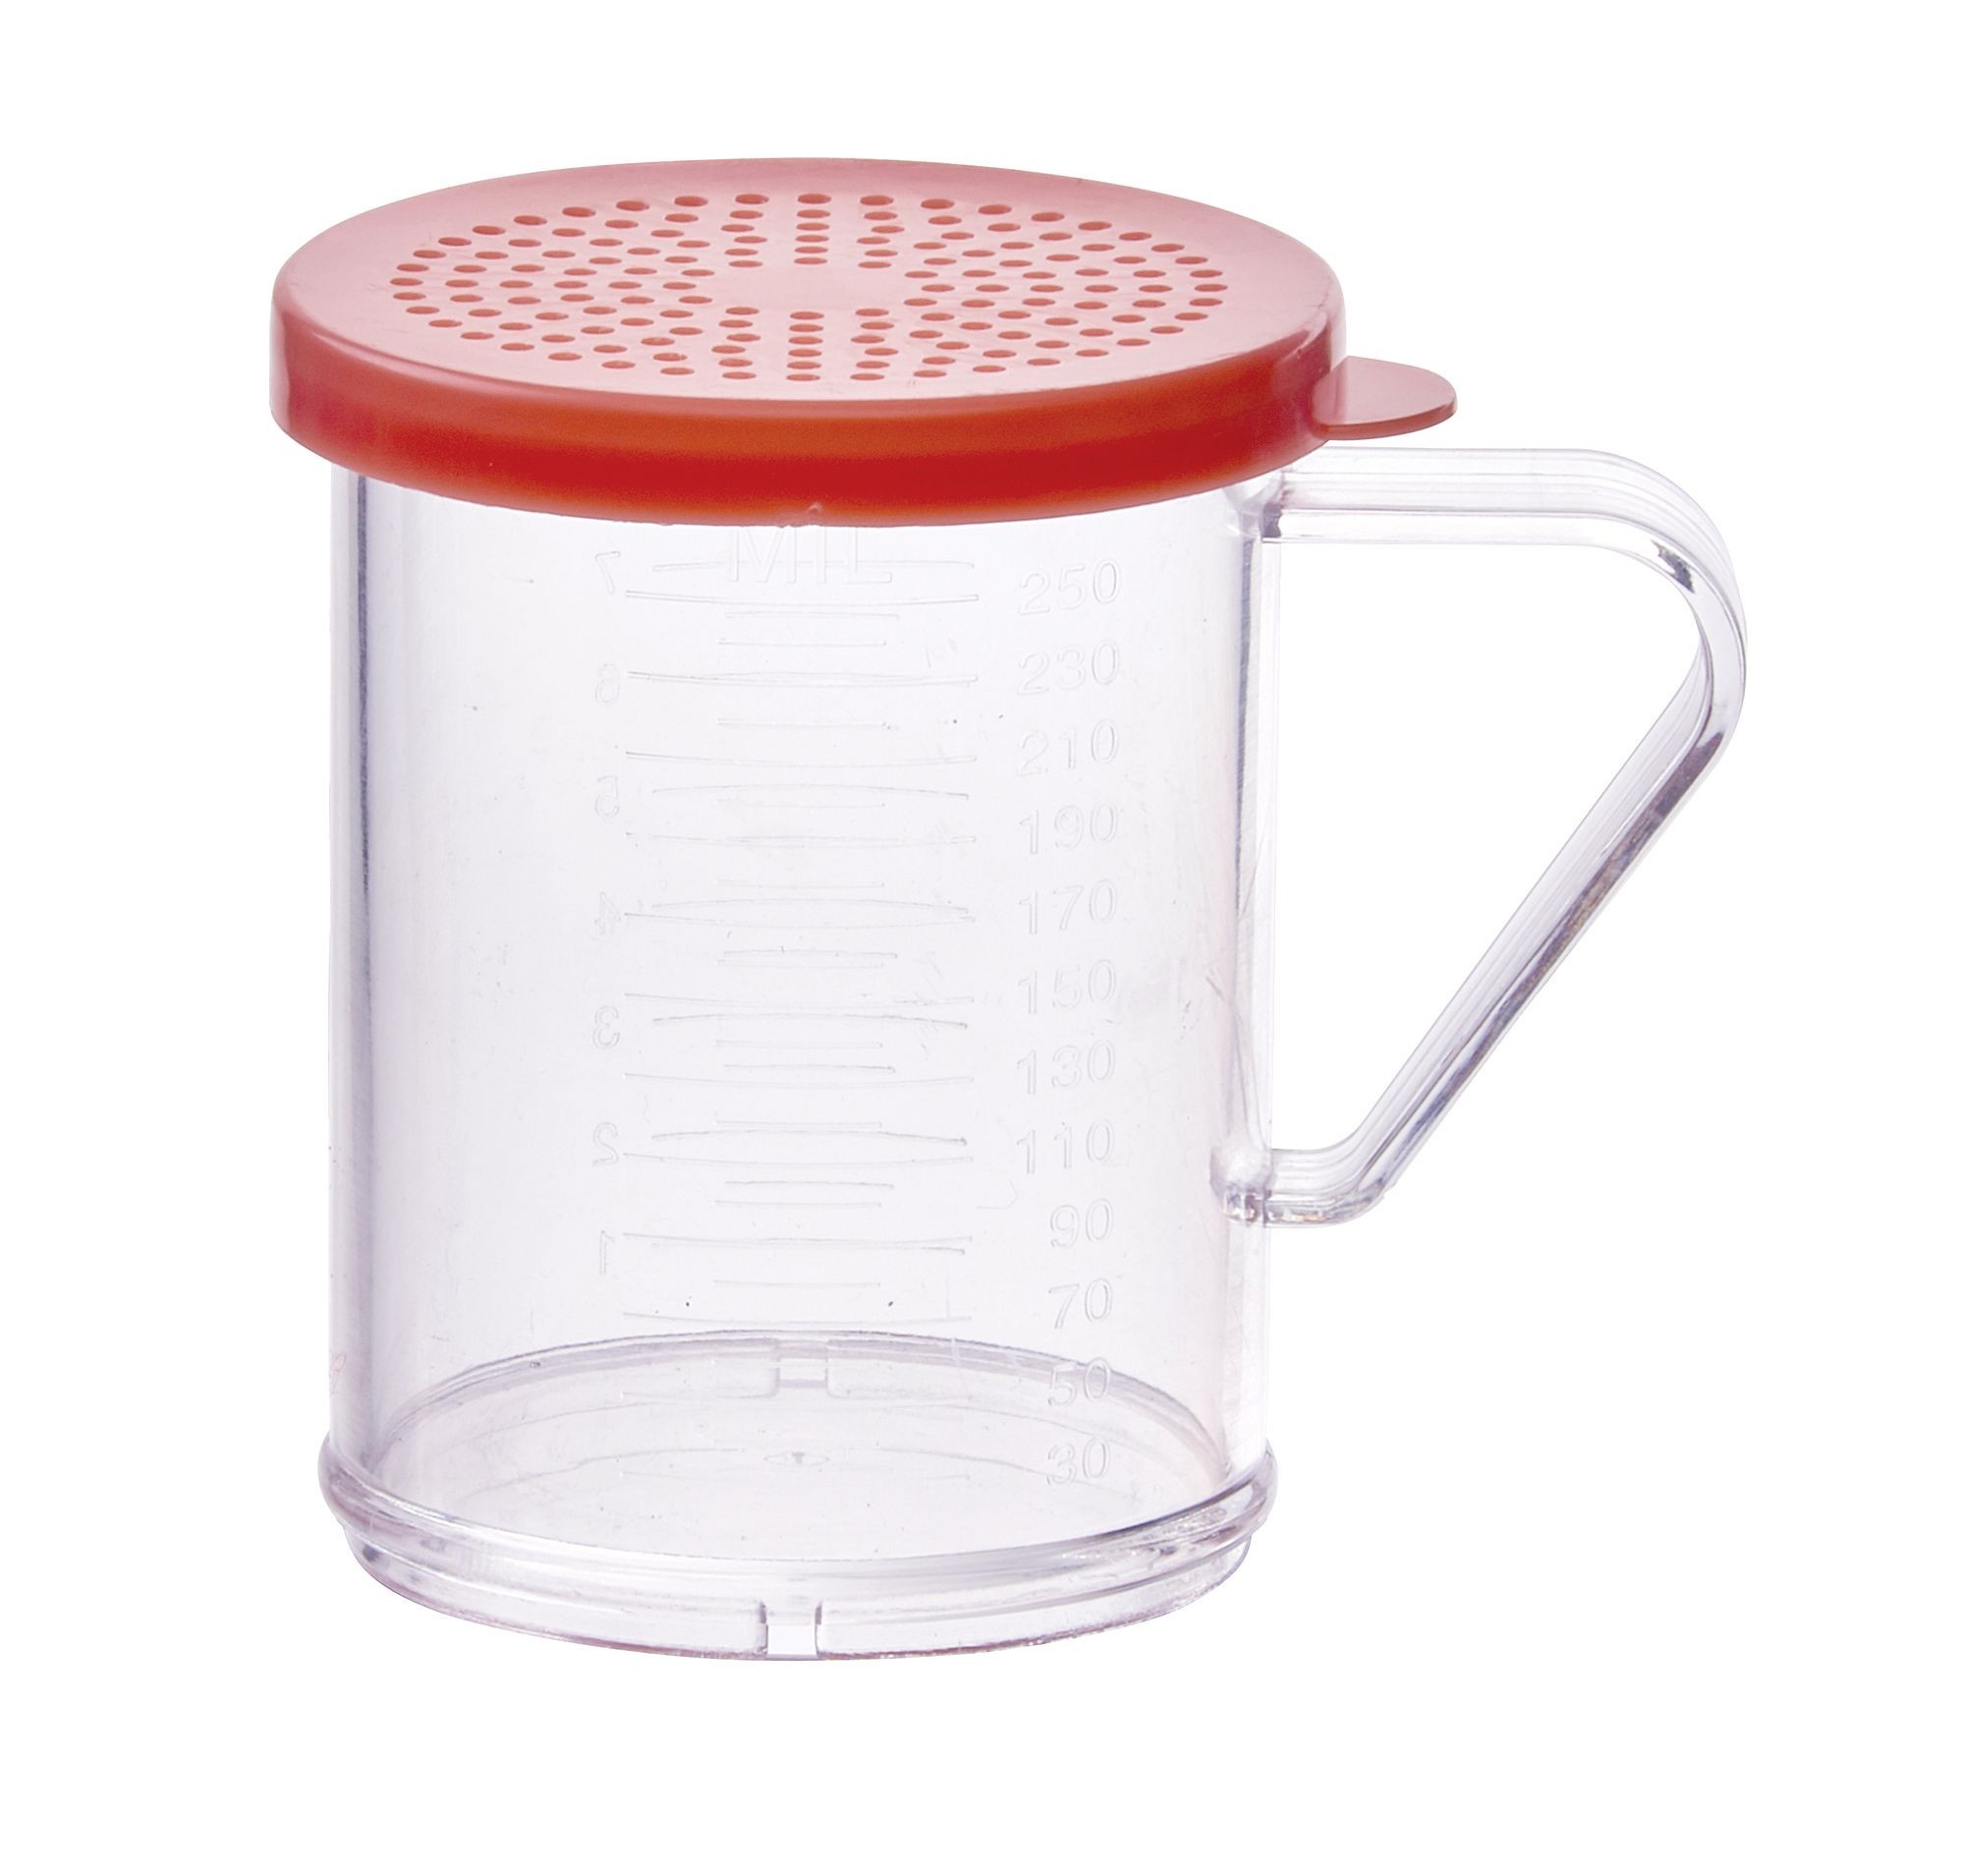 Winco PDG-10R 10 oz. Polycarbonate Dredge with Rose Snap-On Lid